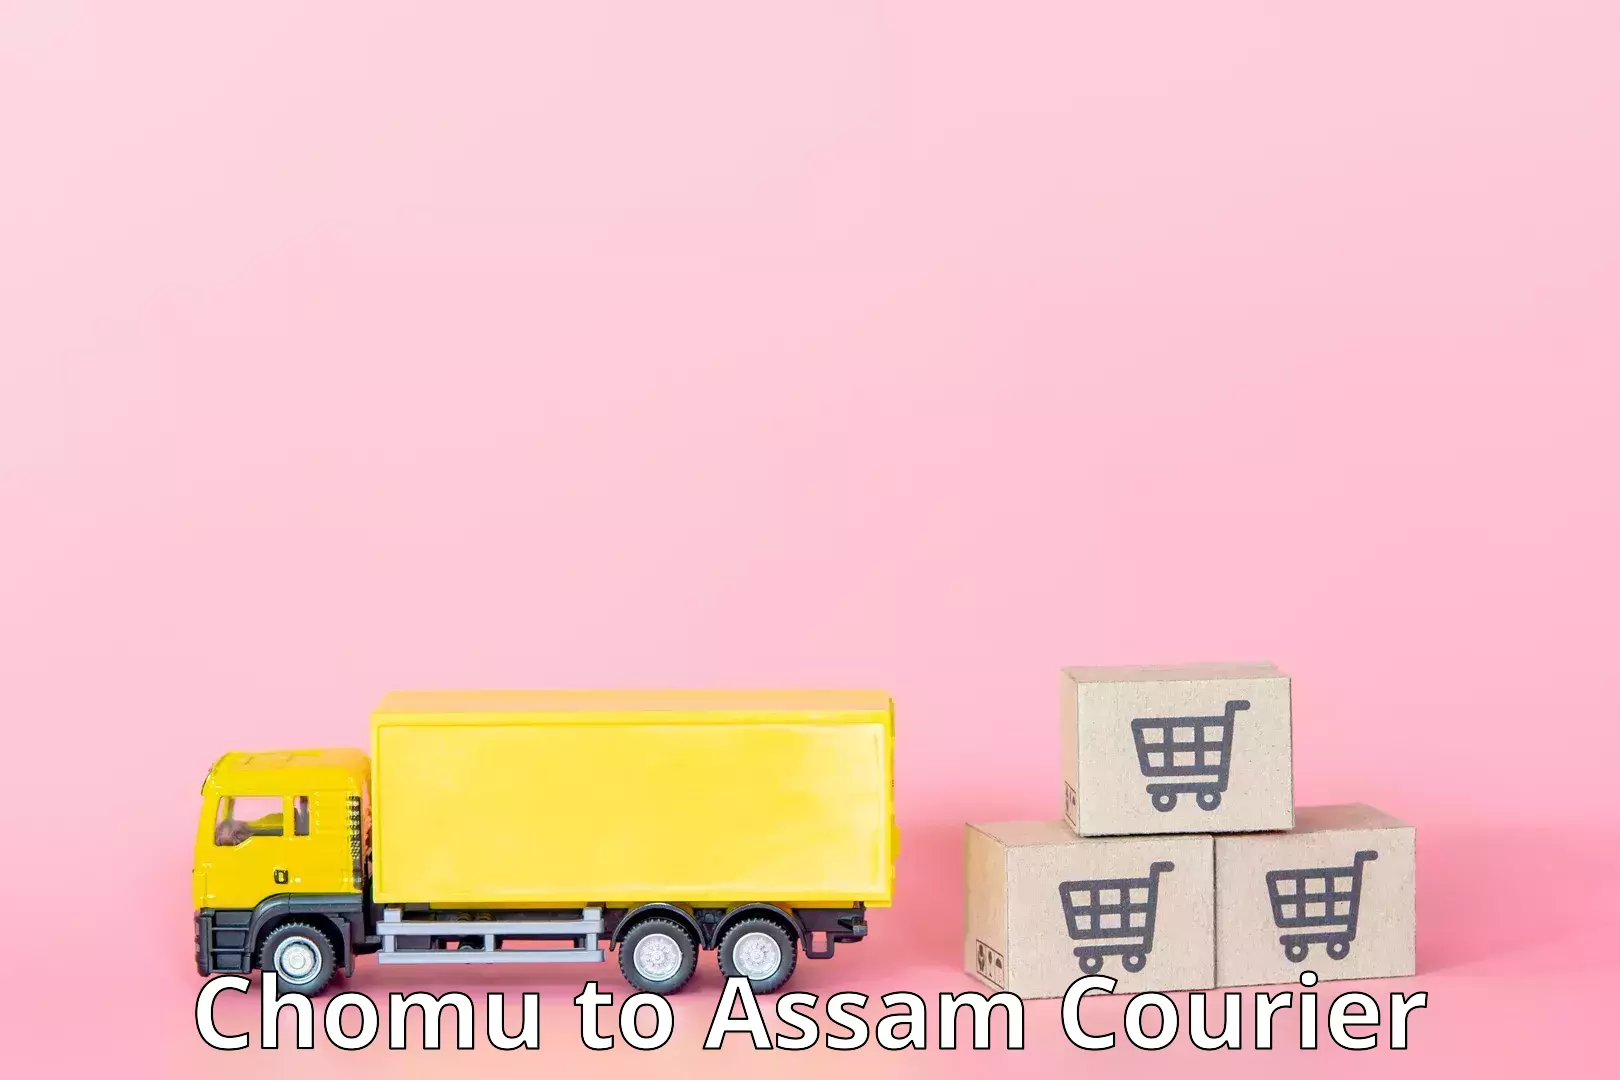 Multi-city courier Chomu to Tamarhat